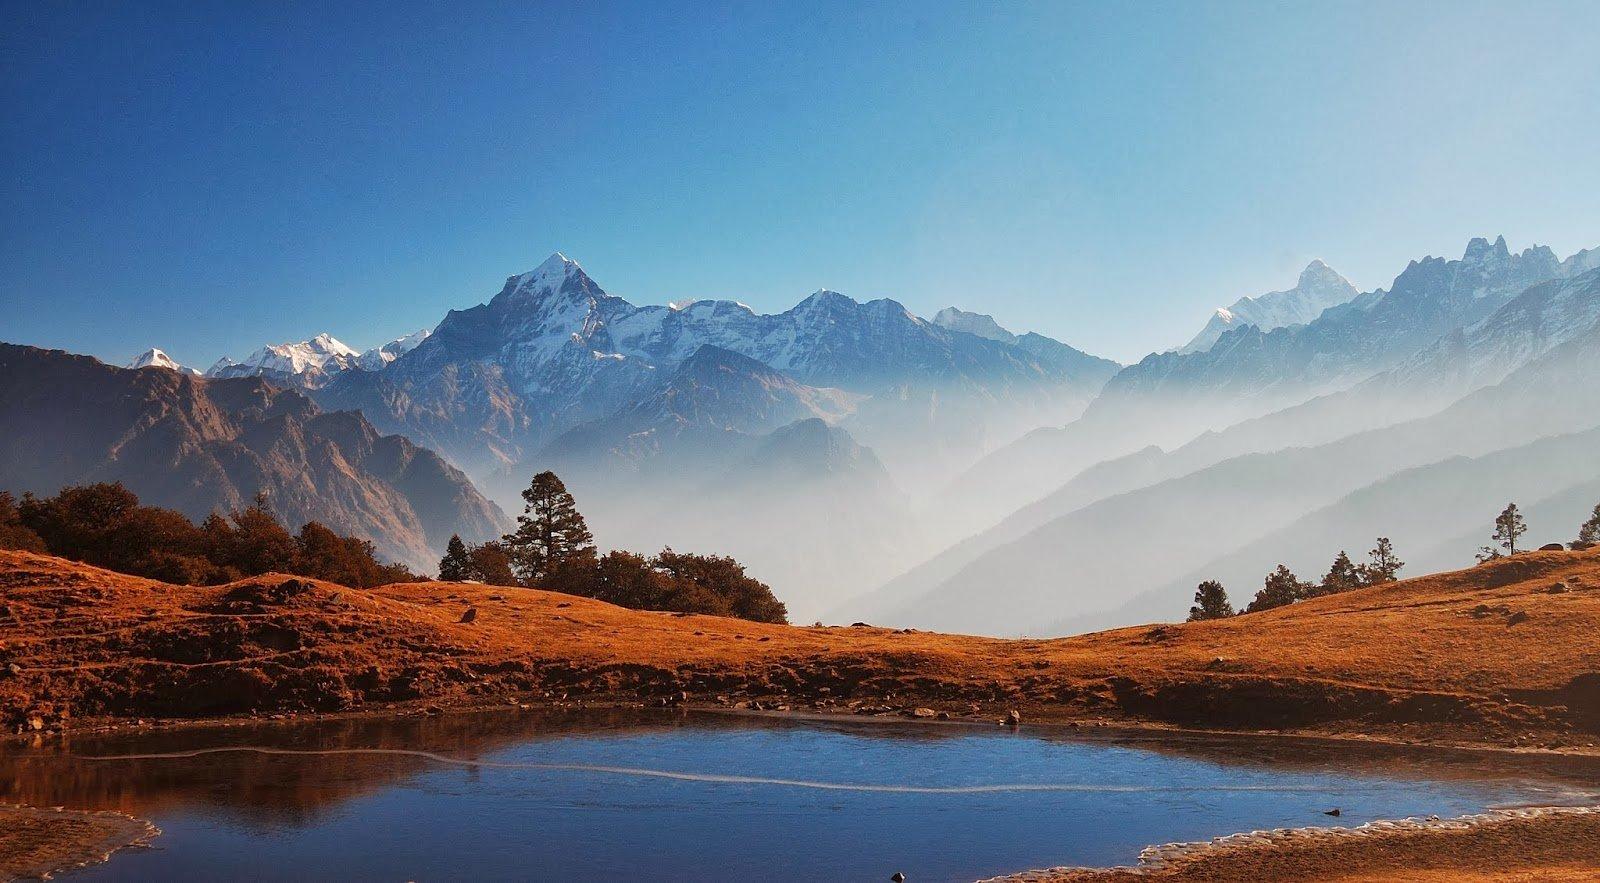 The sight of Mt Nanda Devi, makes this trek a top contender for the most popular trekking place in India for beginners.